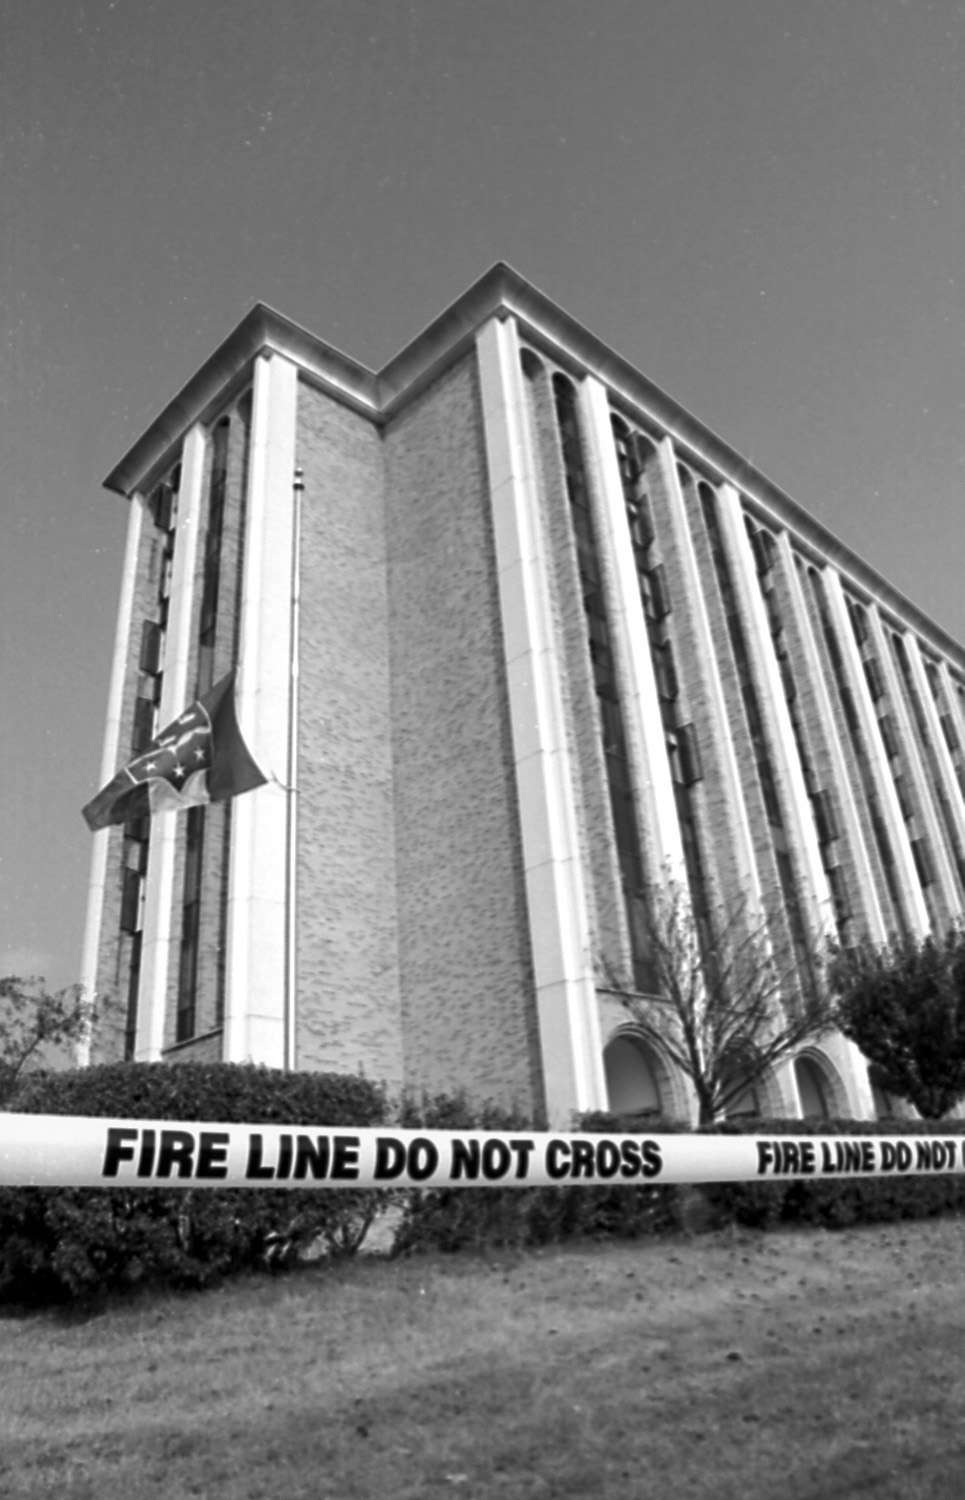 Hester community remembers fire: 20 years after